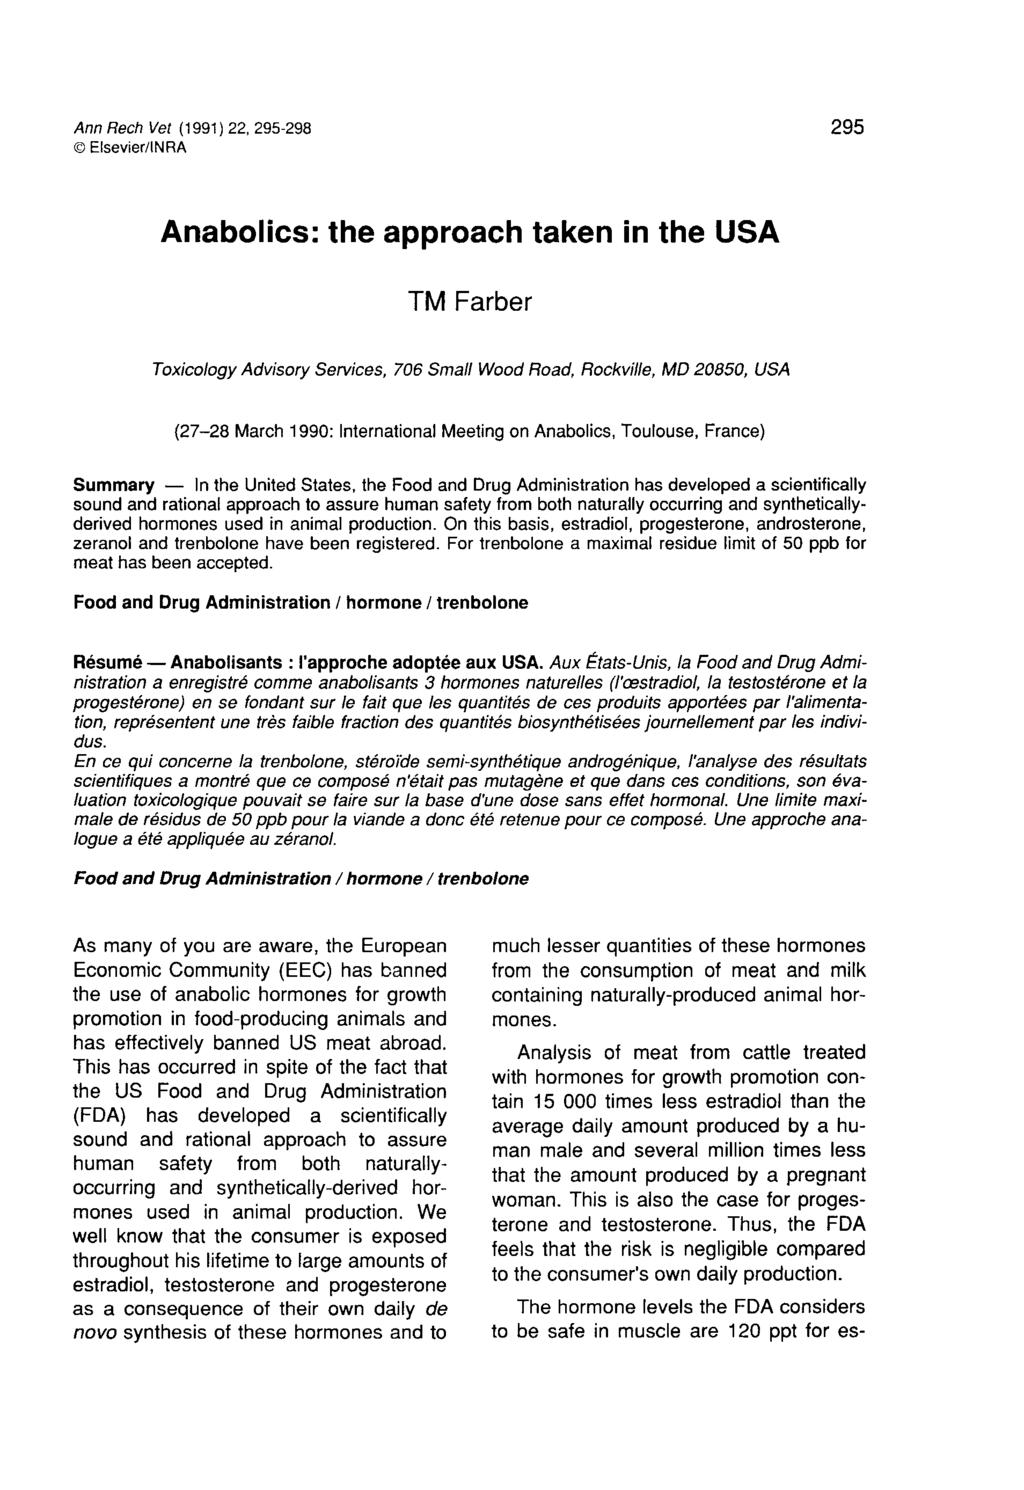 Anabolics: the approach taken in the USA TM Farber Toxicology Advisory Services, 706 Small Wood Road, Rockville, MD 20850, USA (27-28 March 1990: International Meeting on Anabolics, Toulouse, France)